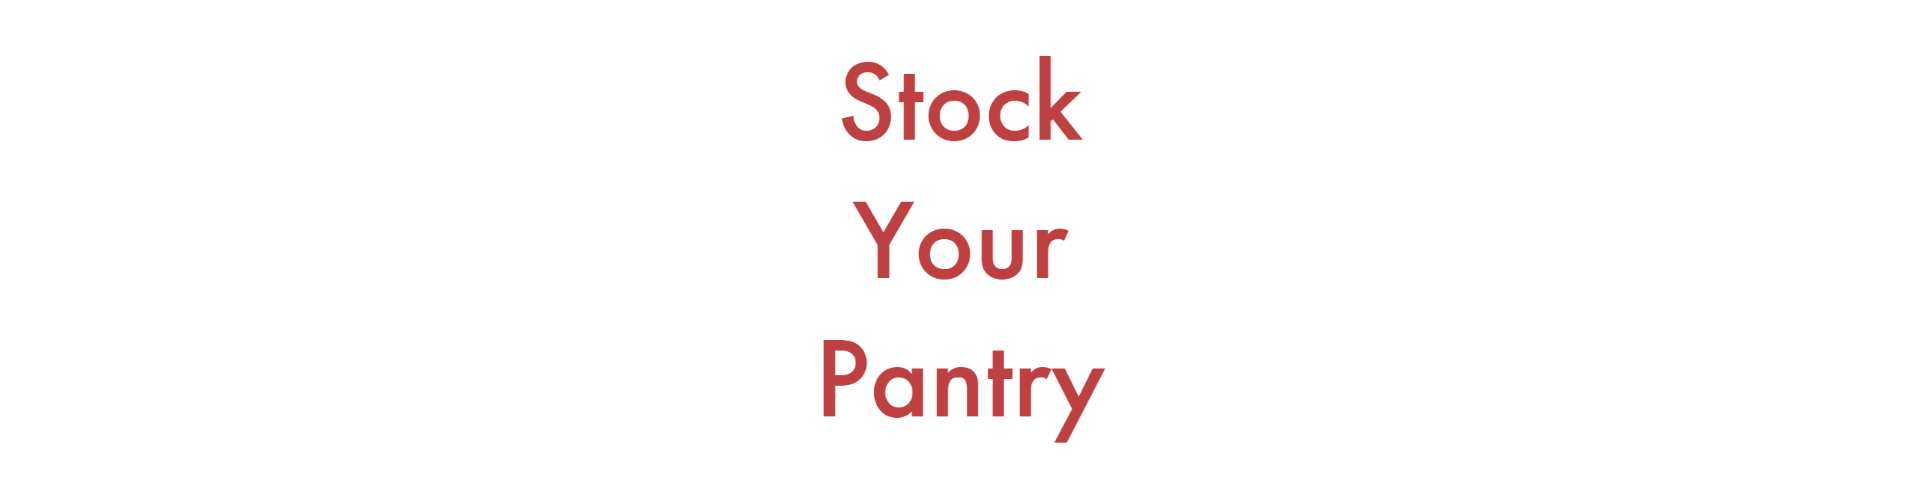 Stock Your Pantry